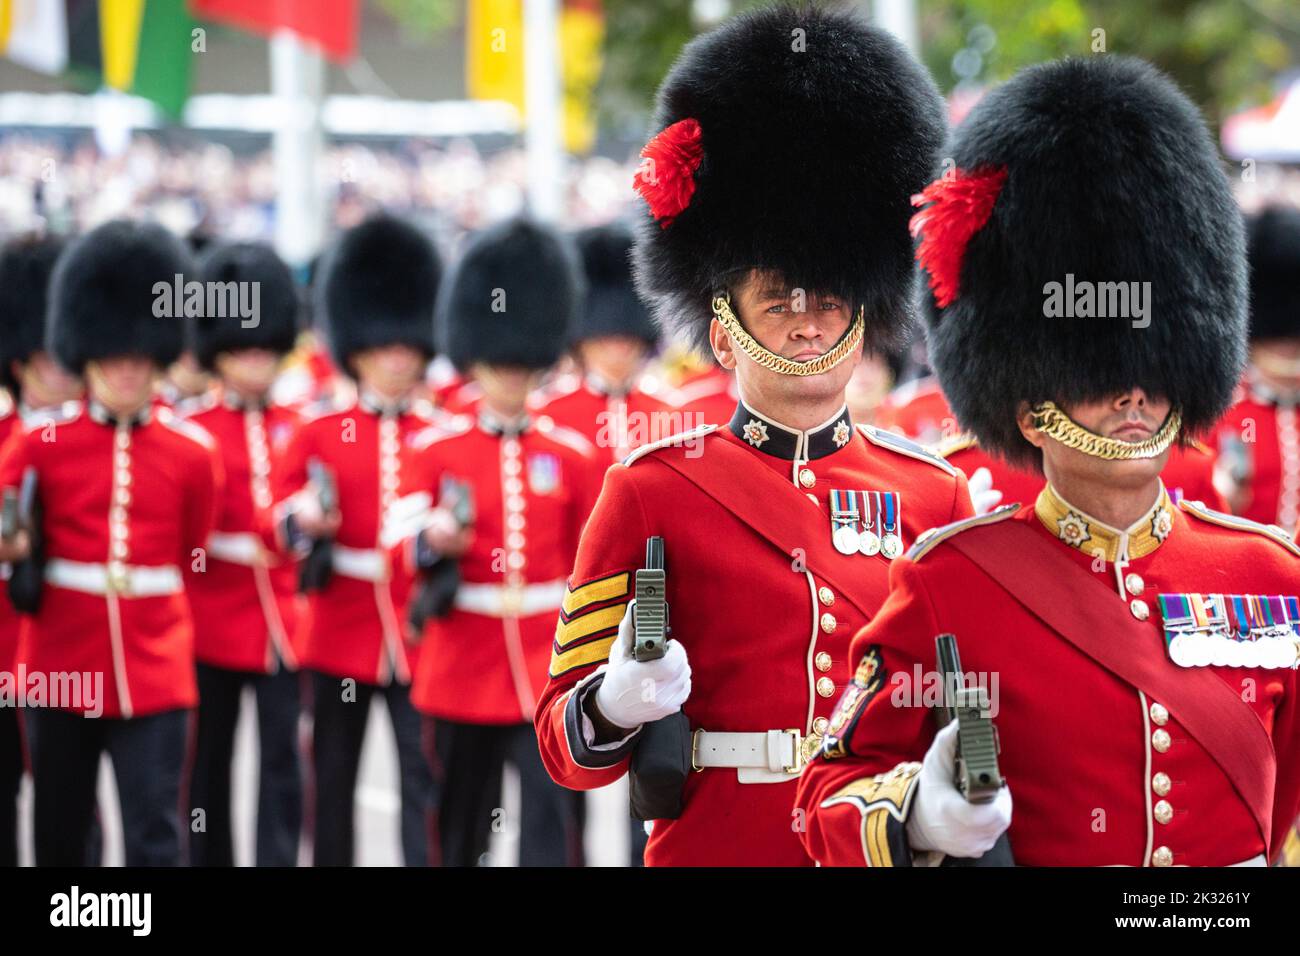 Queen Elizabeth II funeral procession in London, 22 September 2022, England, United Kingdom Stock Photo